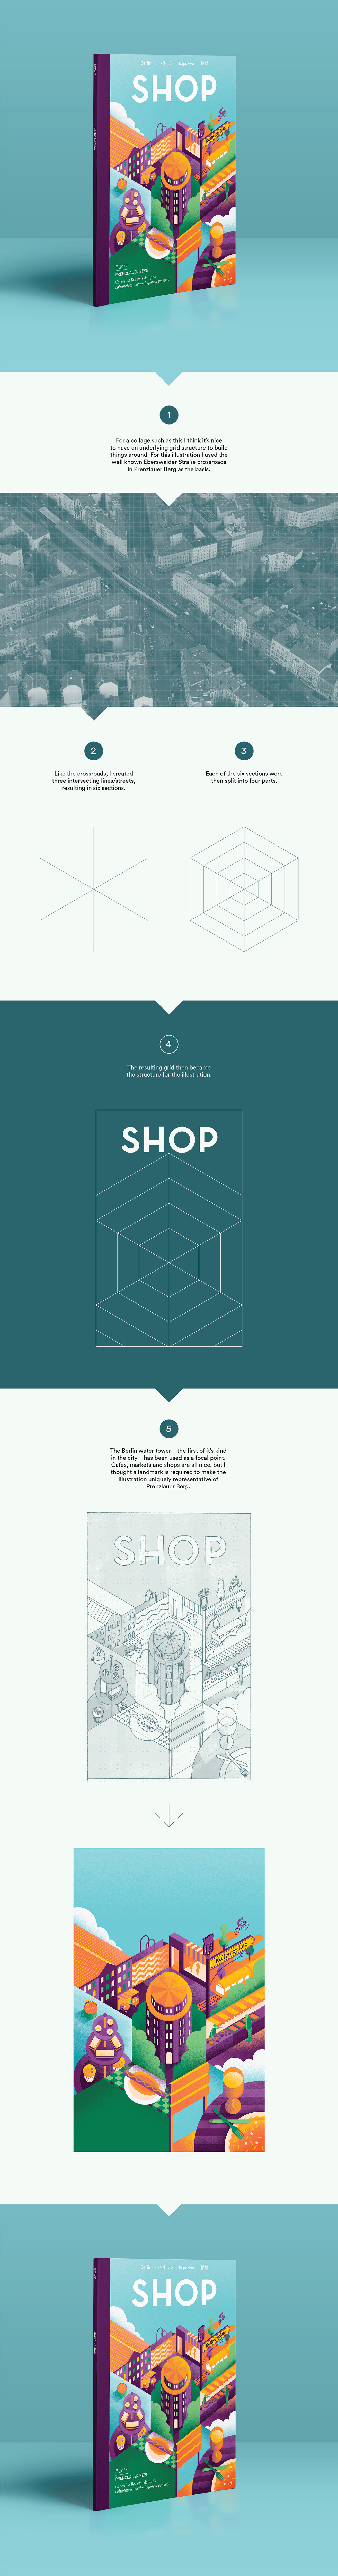 Graphic Collage geometric Editiorial food illustration hexagon shop magazine Isometric buildings cover berlin